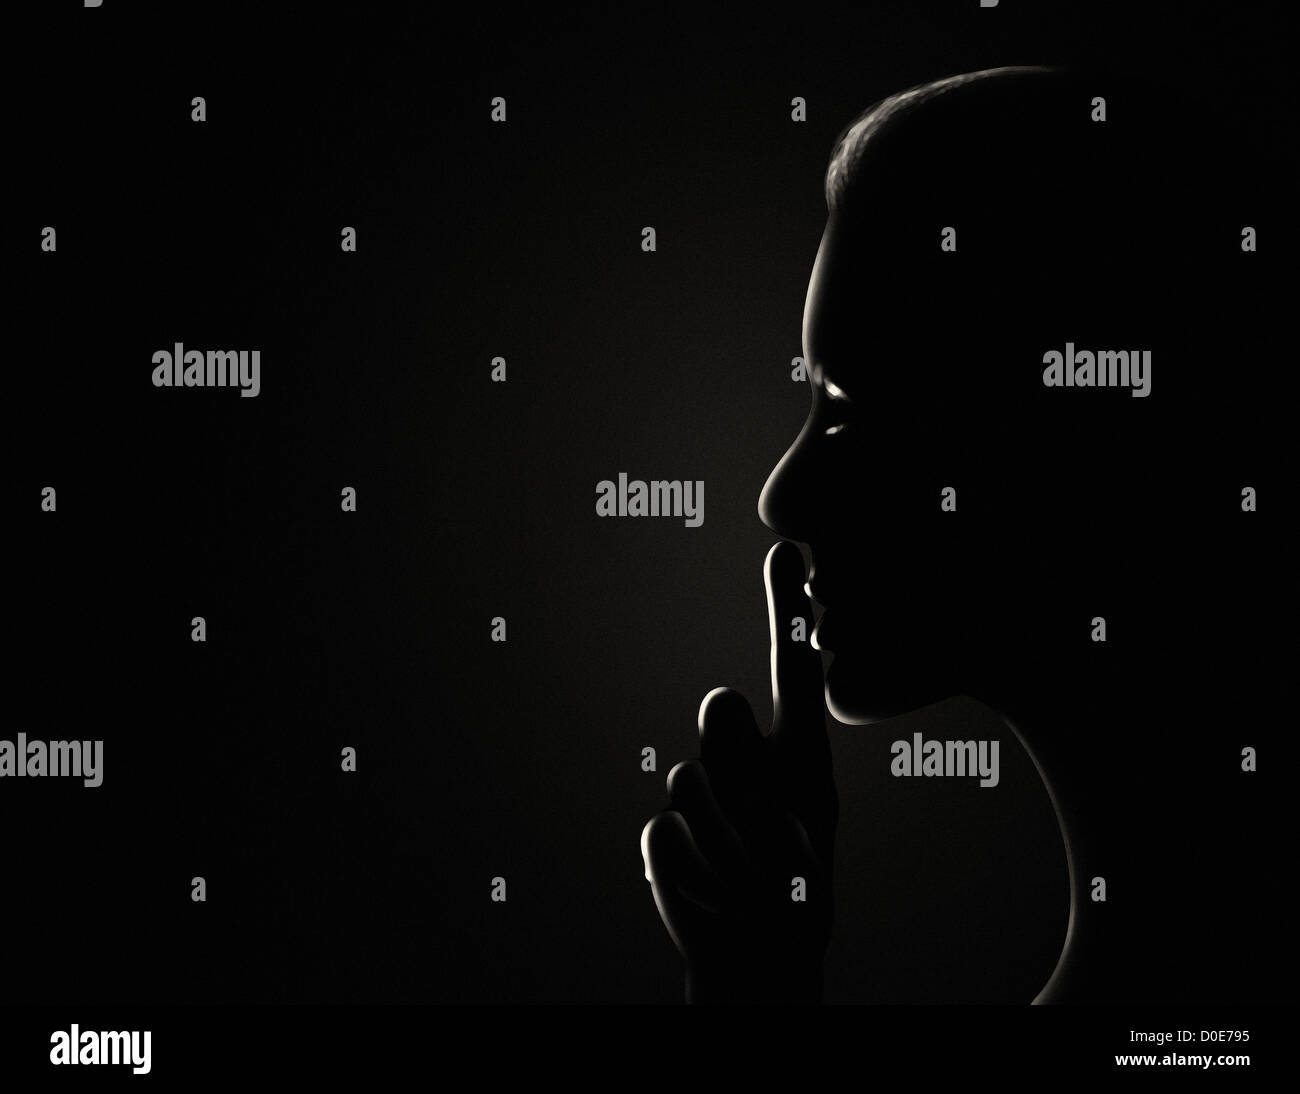 Woman in the dark with her finger to her lips gesturing silence. Stock Photo